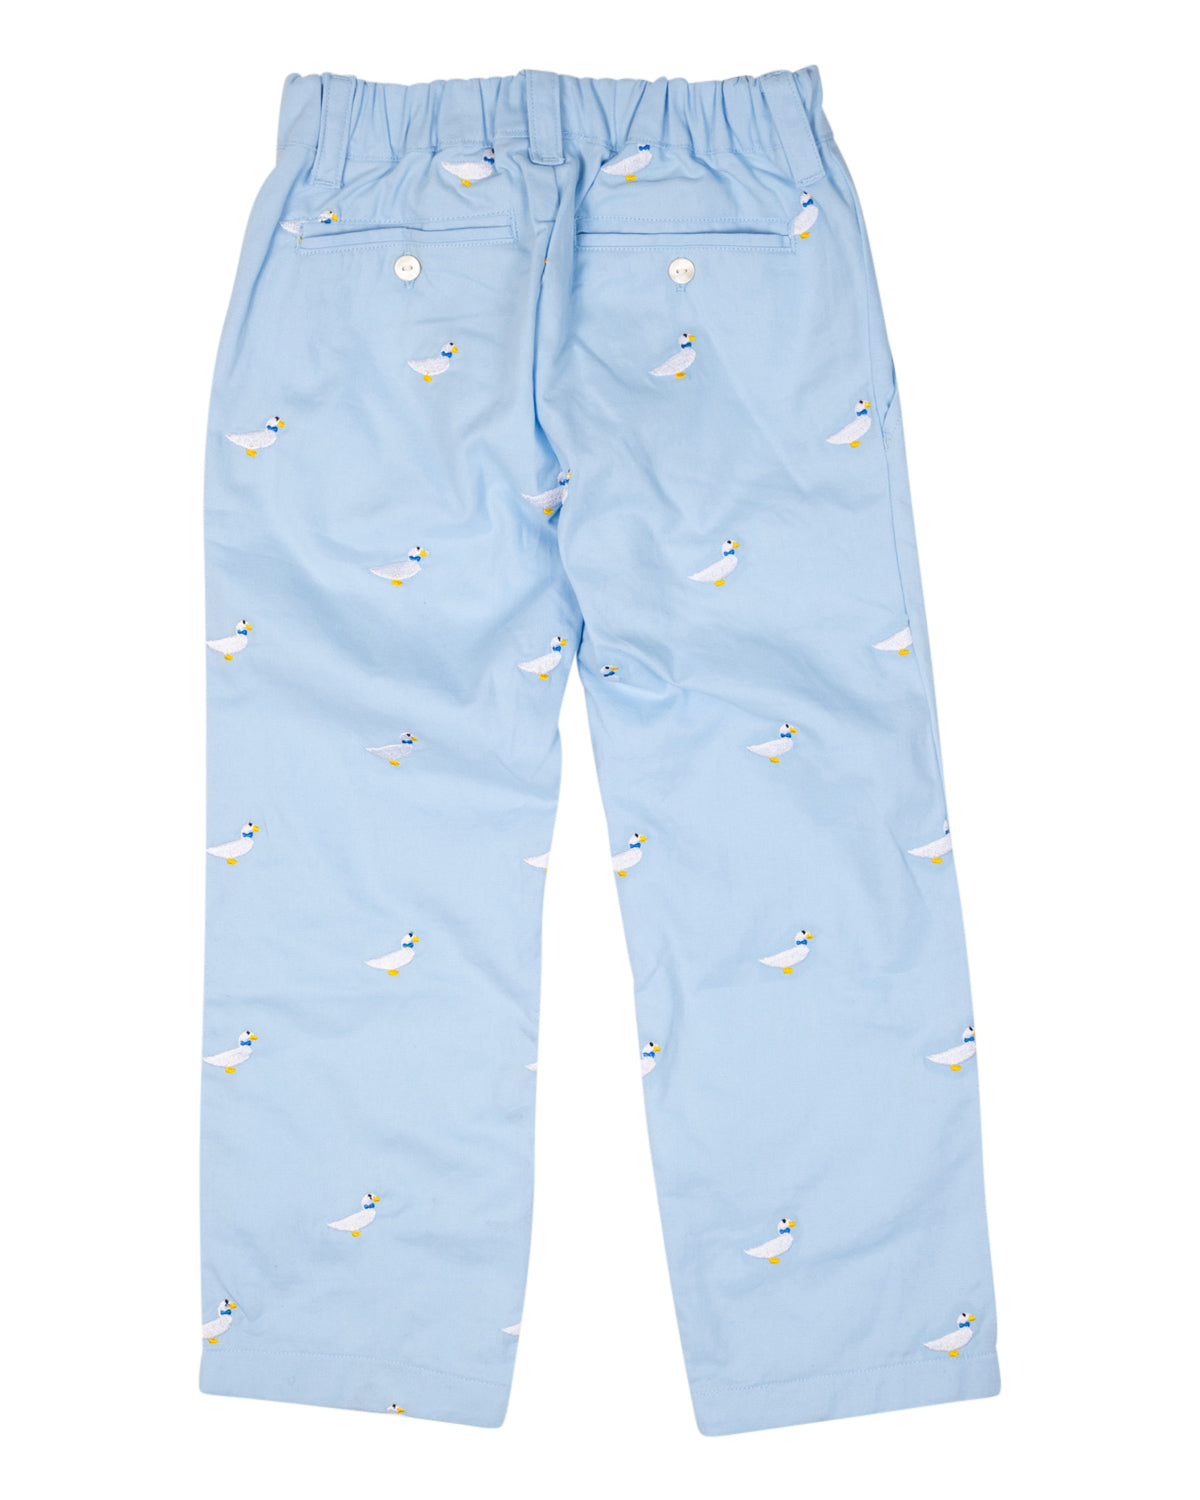 Duck Crossing Embroidered Pants-FINAL SALE